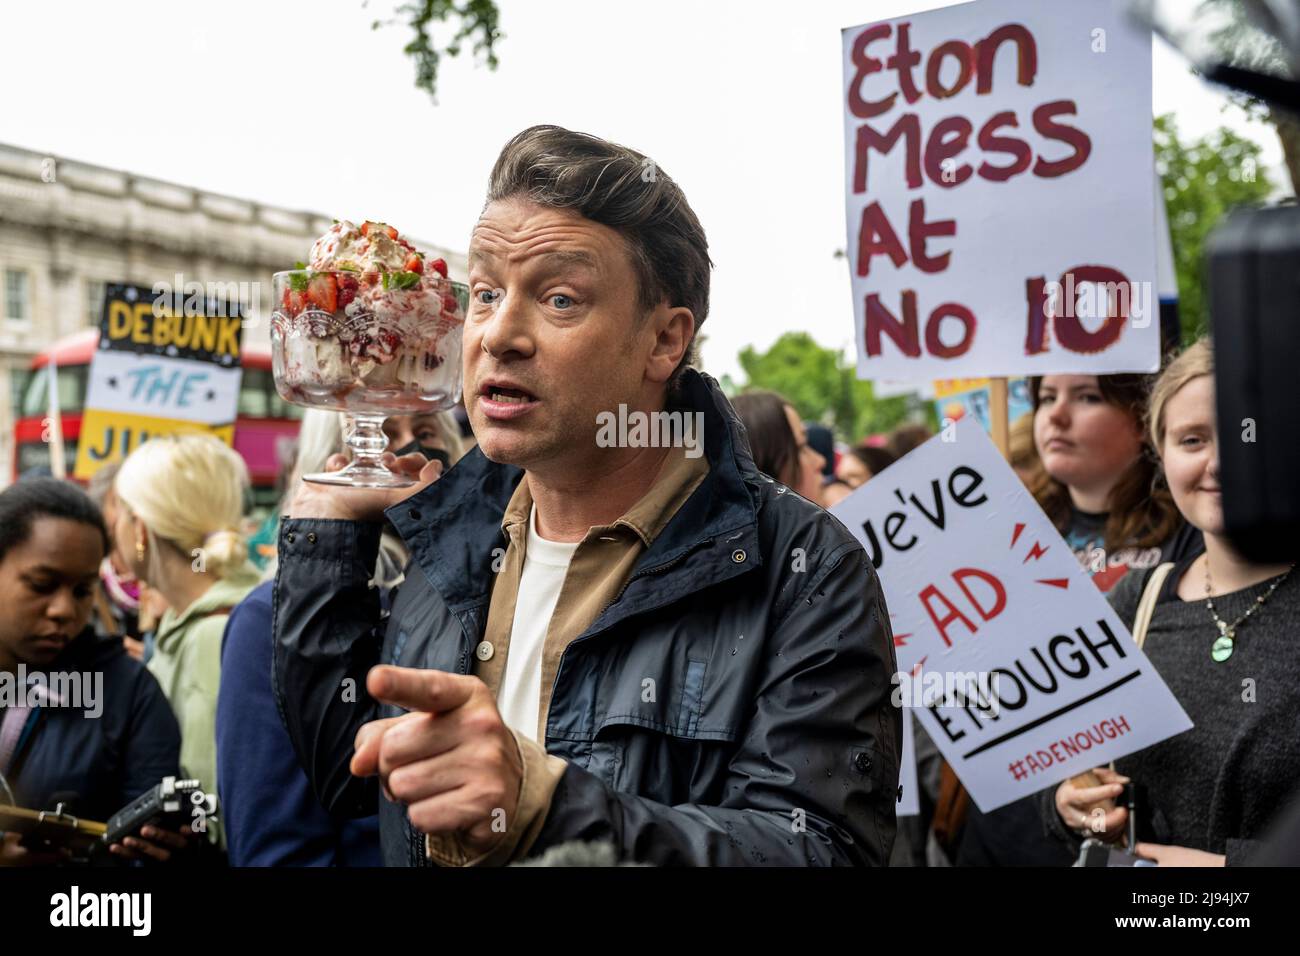 London, UK.  20 May 2022.  TV chef Jamie Oliver outside Downing Street at an Eton Mess protest.  To protect child health, protesters want the government to reverse its decision to defer for a year a ban on buy-one-get-one-free deals on unhealthy foods and a ban on TV junk food adverts before a 9pm watershed.  The government says the deferral will enable a review of the impact on budgets in the face of the cost-of-living crisis.  Eton Mess is a dessert that references where Boris Johnson, Prime Minister, went to school.  Credit: Stephen Chung / Alamy Live News Stock Photo